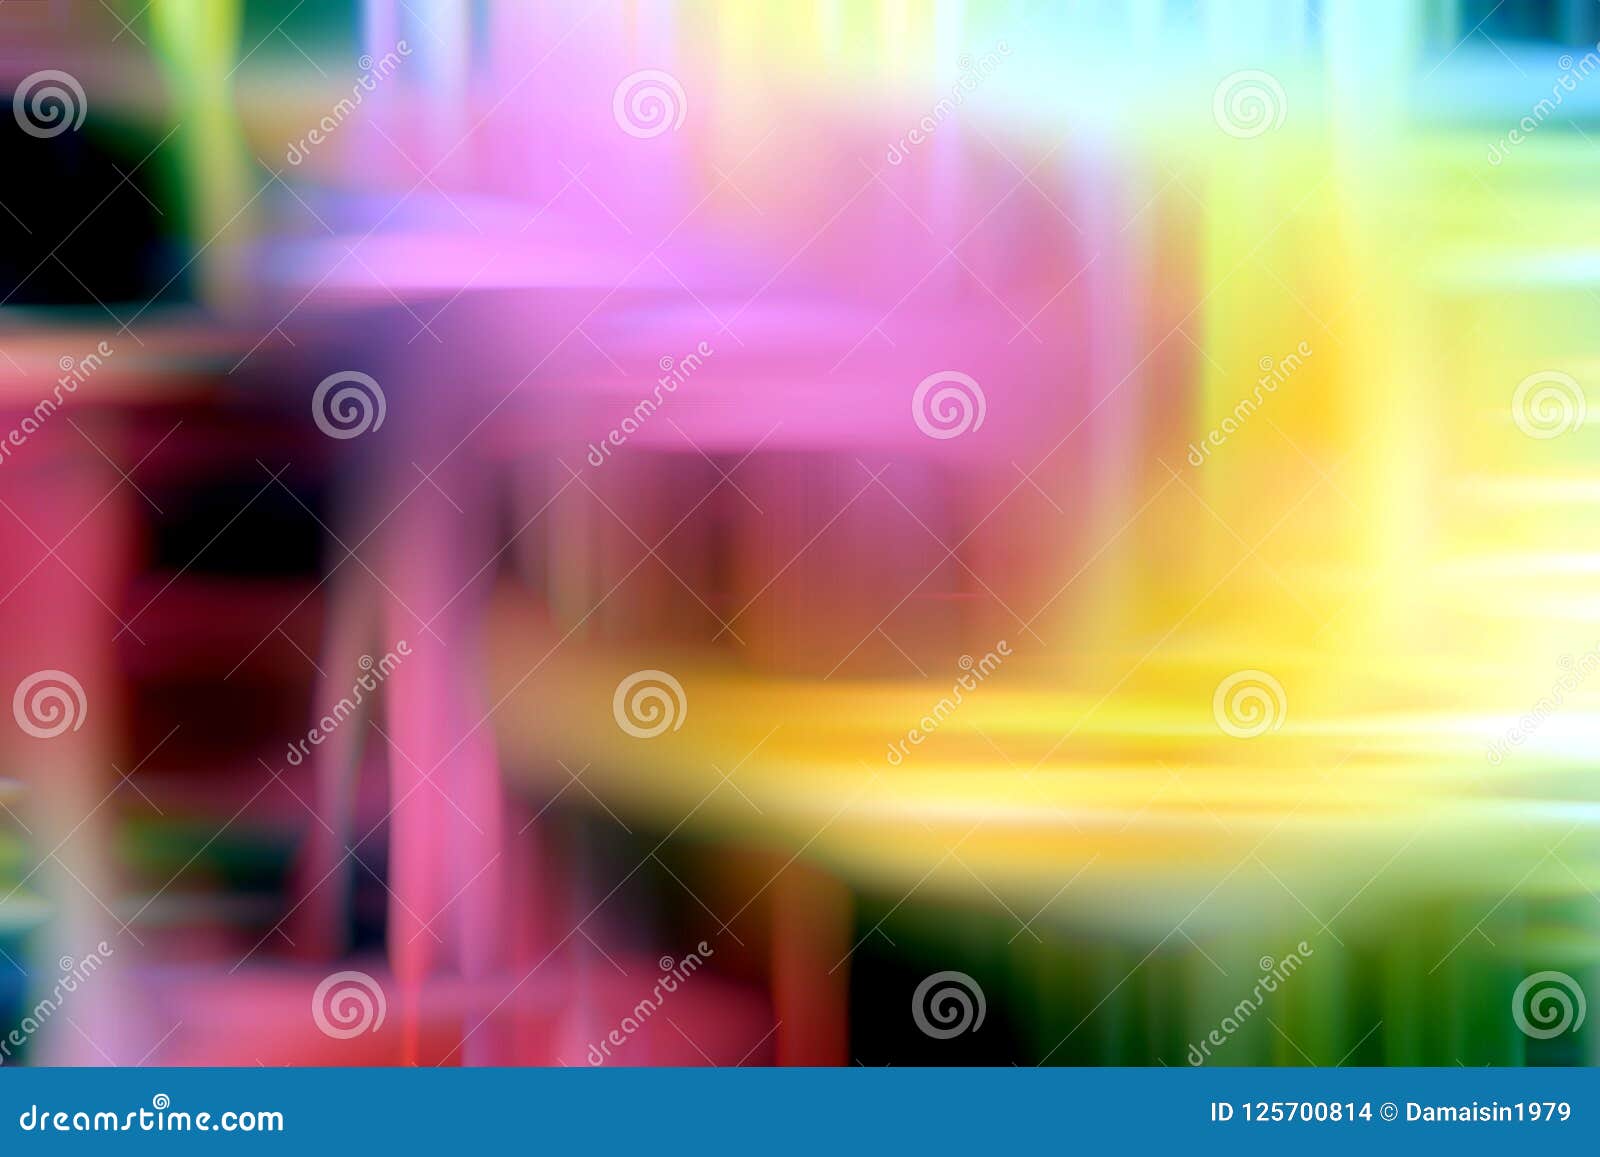 colorful light background, soft mix contrasts, lines, s, graphics. abstract background and texture